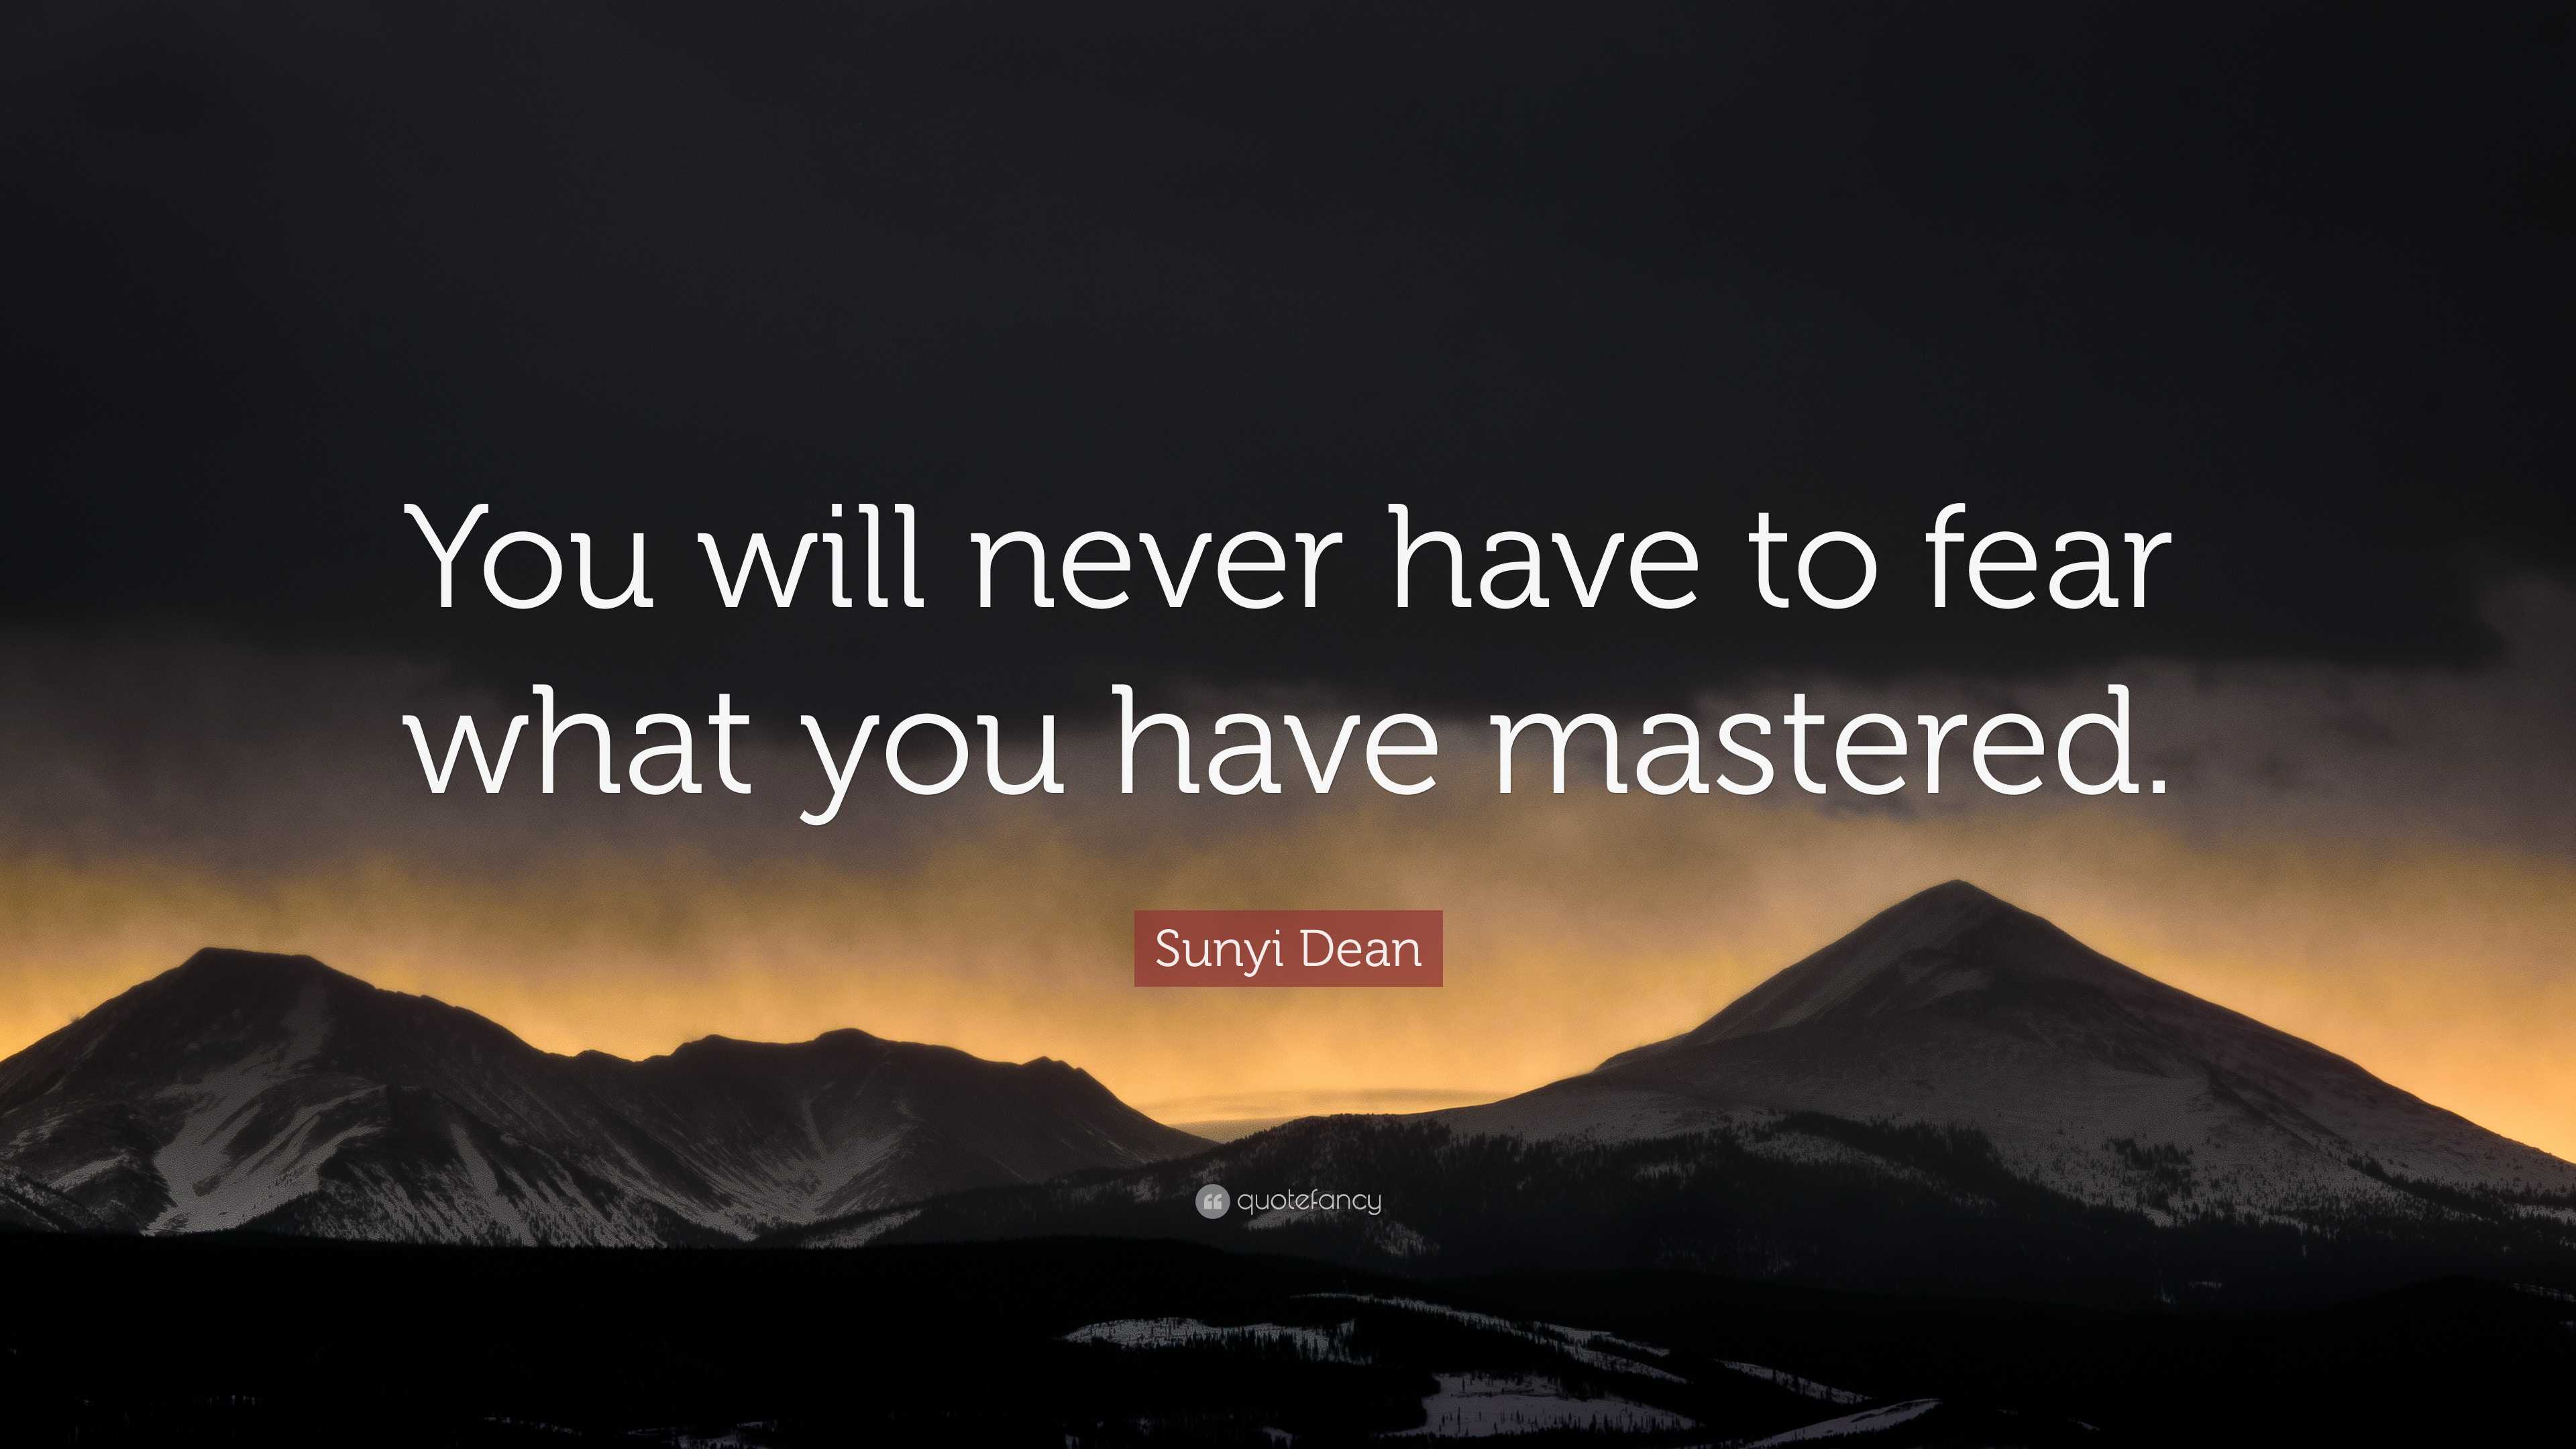 Sunyi Dean Quote: “You will never have to fear what you have mastered.”